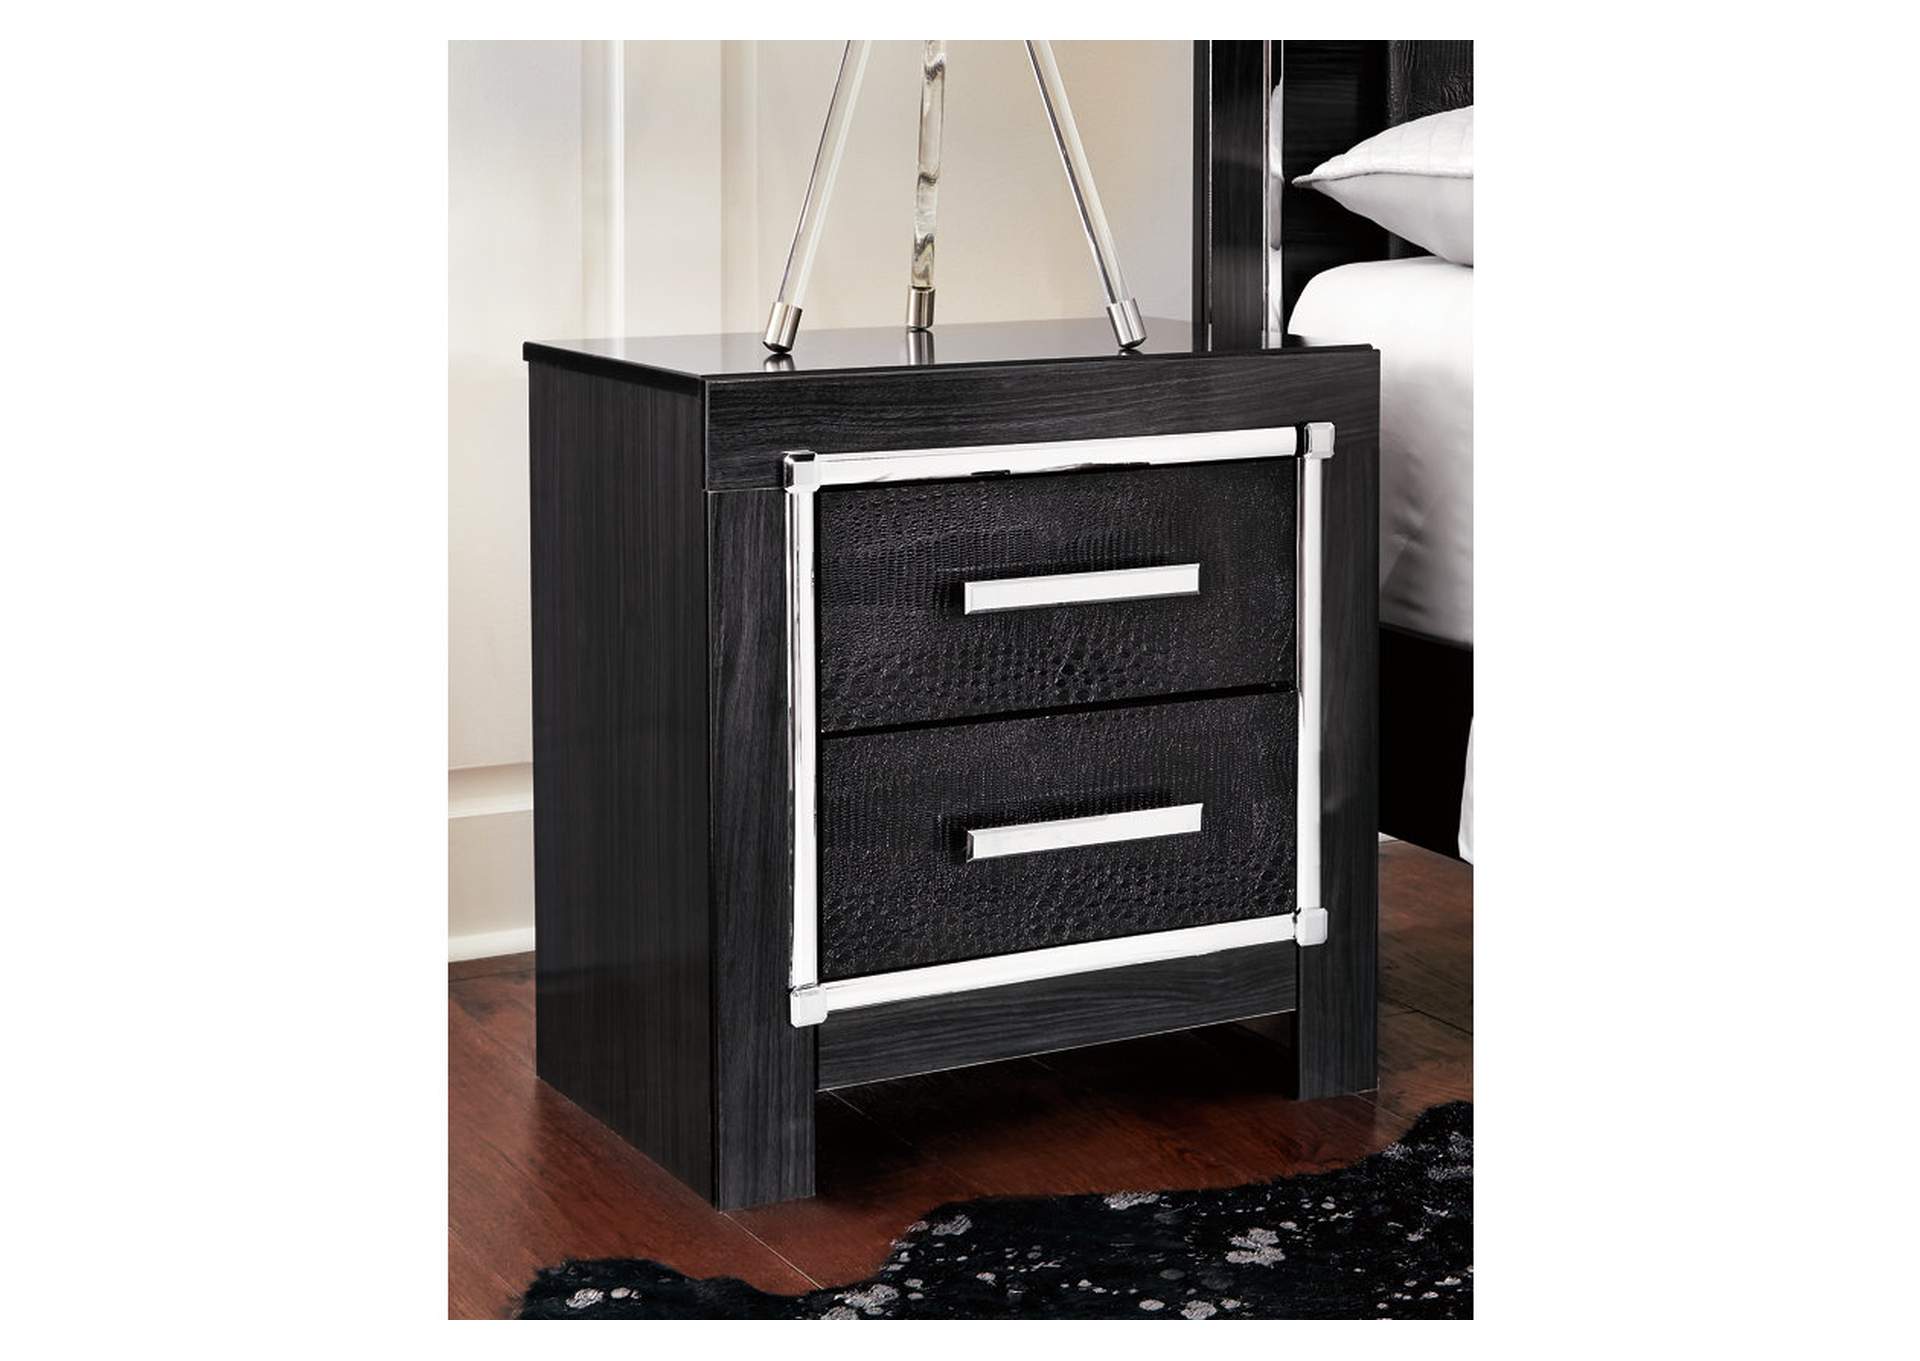 Kaydell King Upholstered Panel Bed , Dresser, Mirror, Chest and 2 Nightstands,Signature Design By Ashley